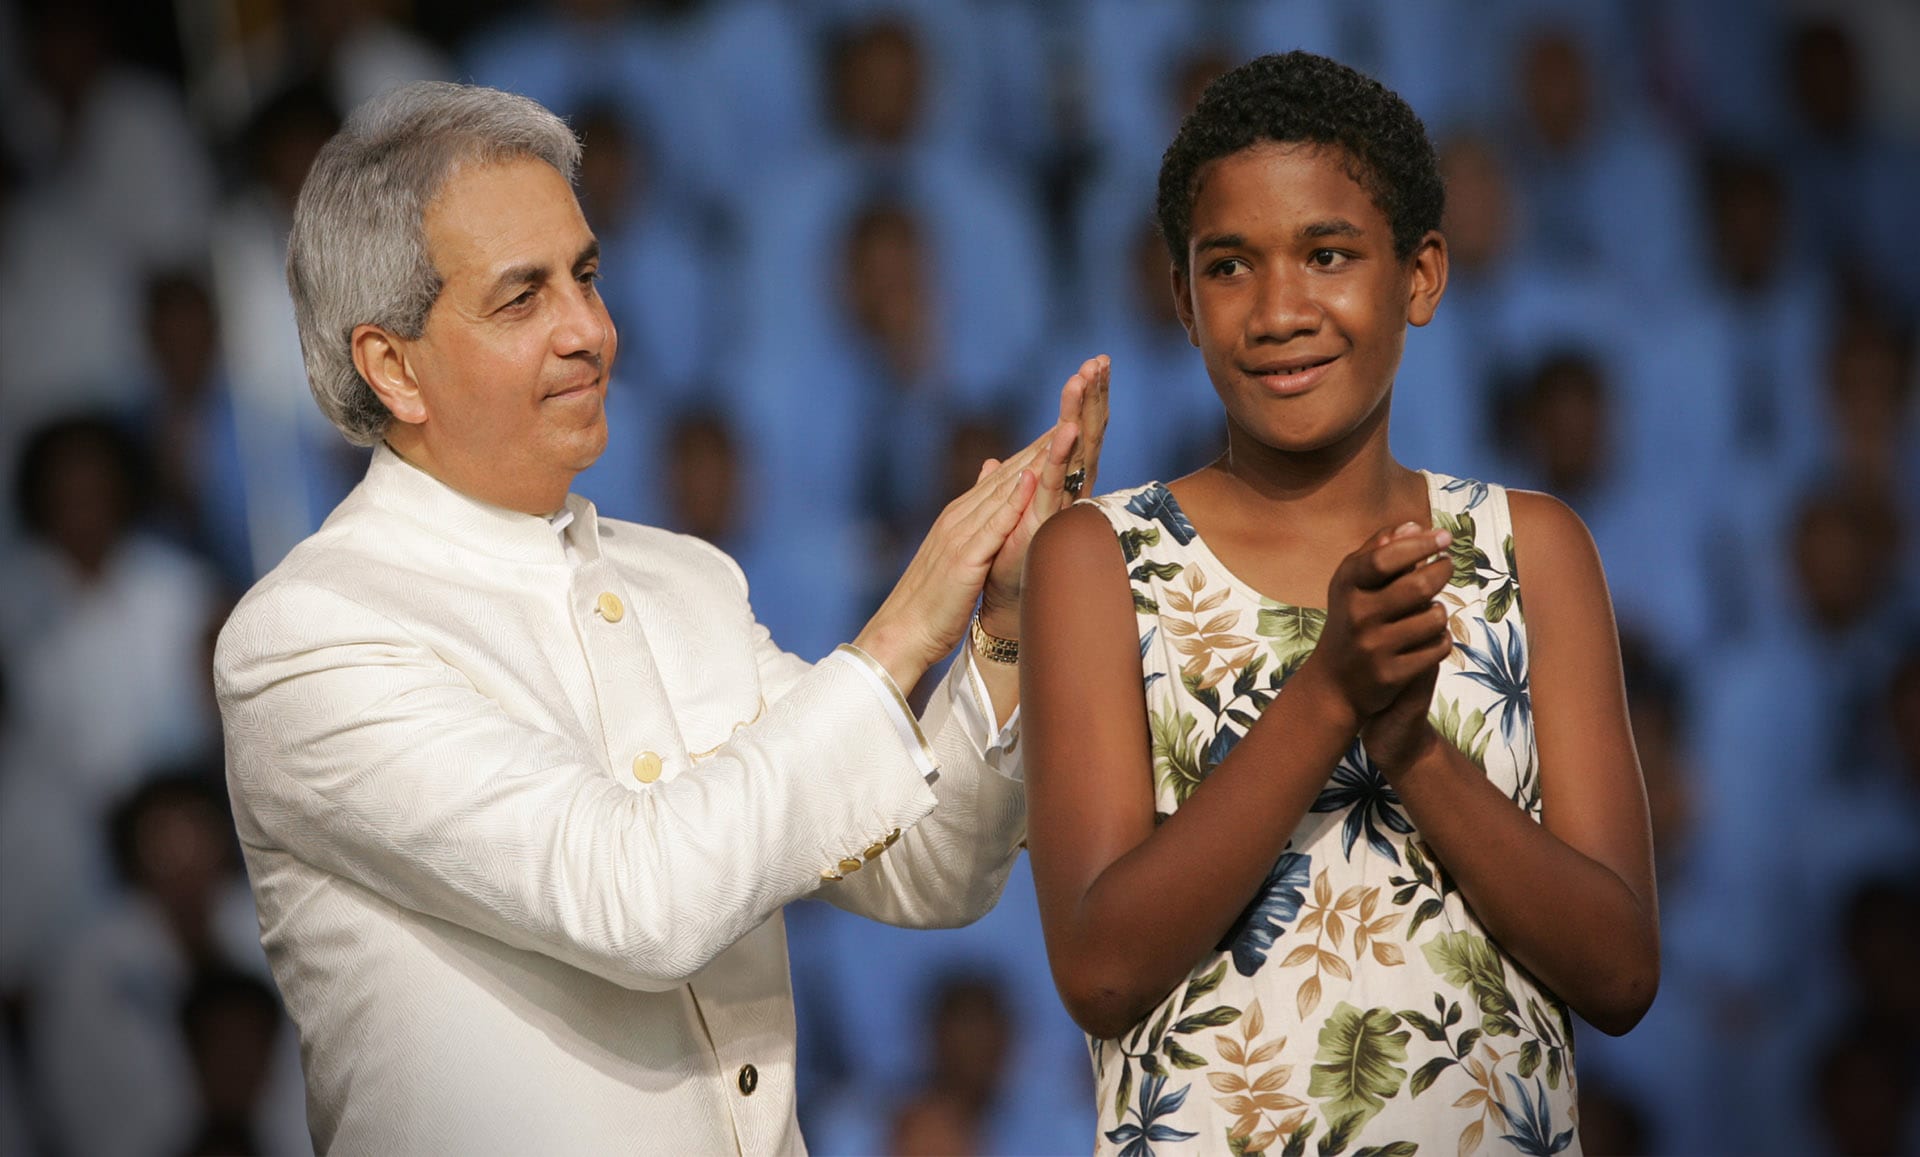 Girl Healed at Benny Hinn Ministries Event